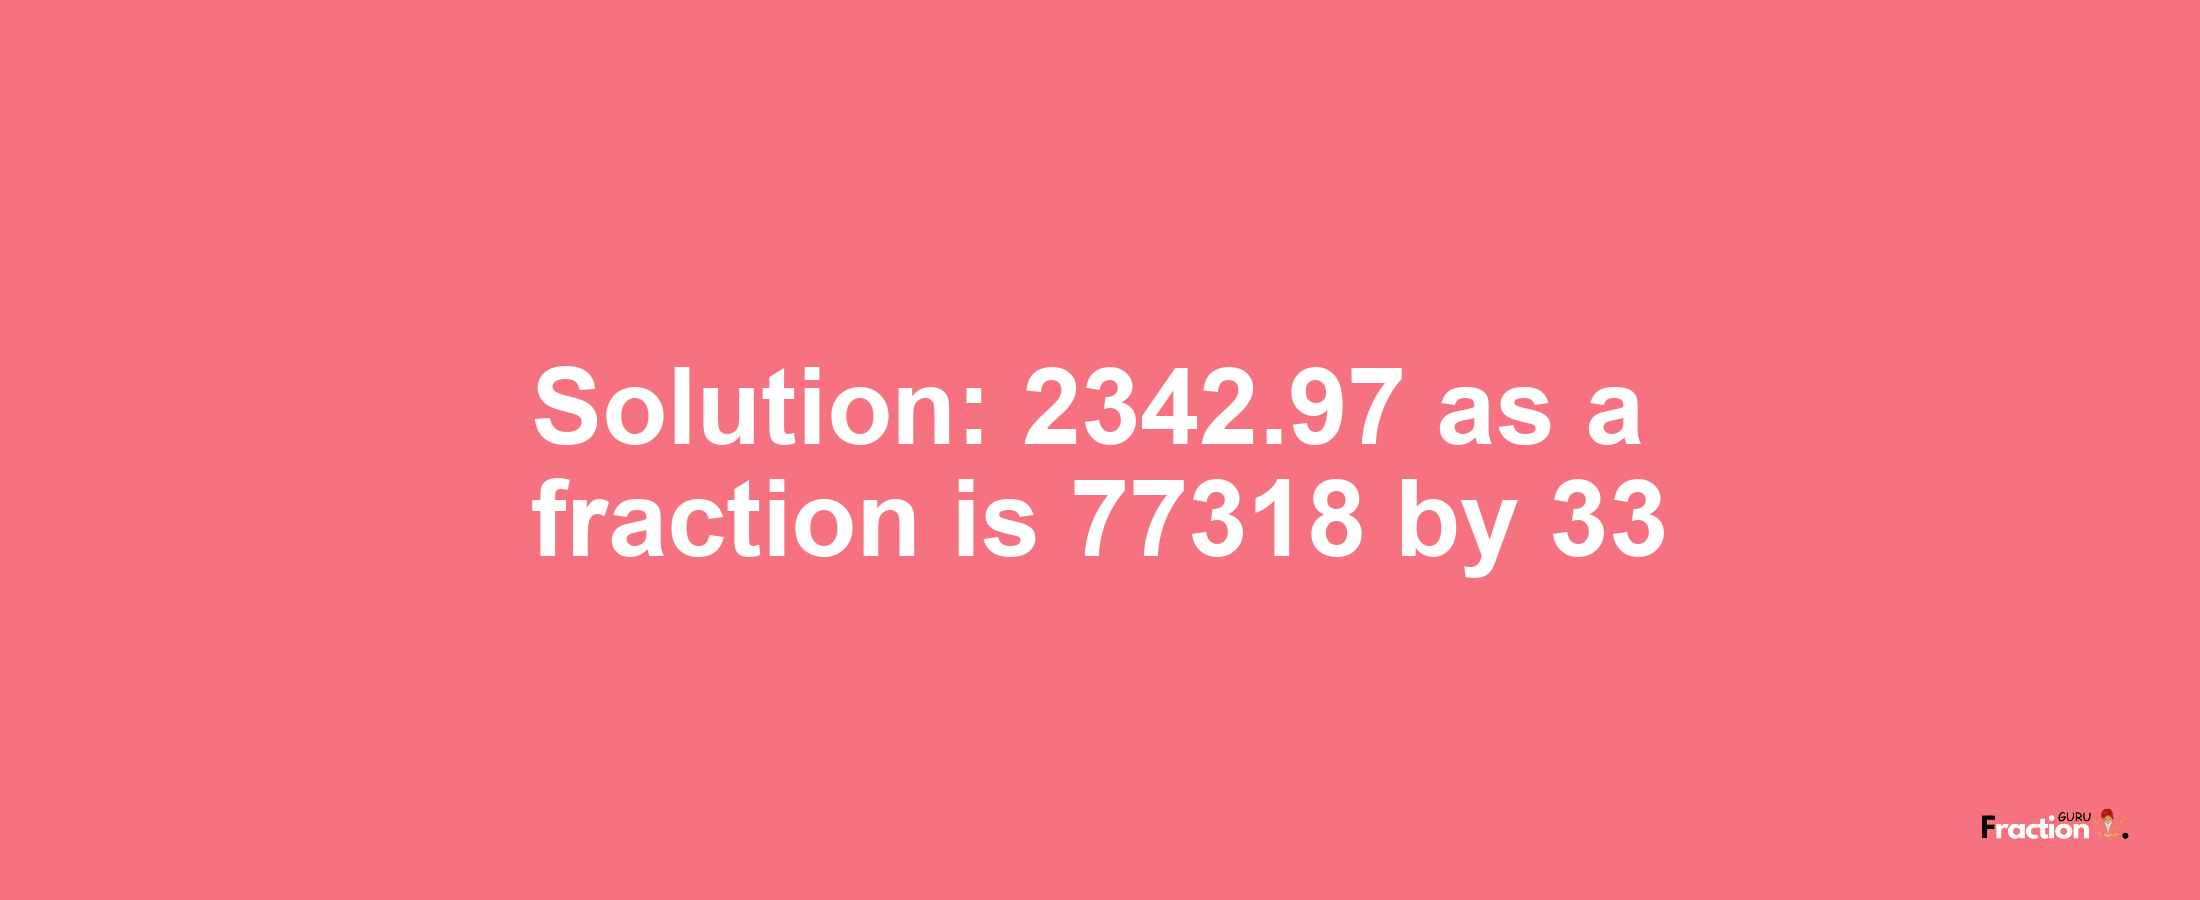 Solution:2342.97 as a fraction is 77318/33